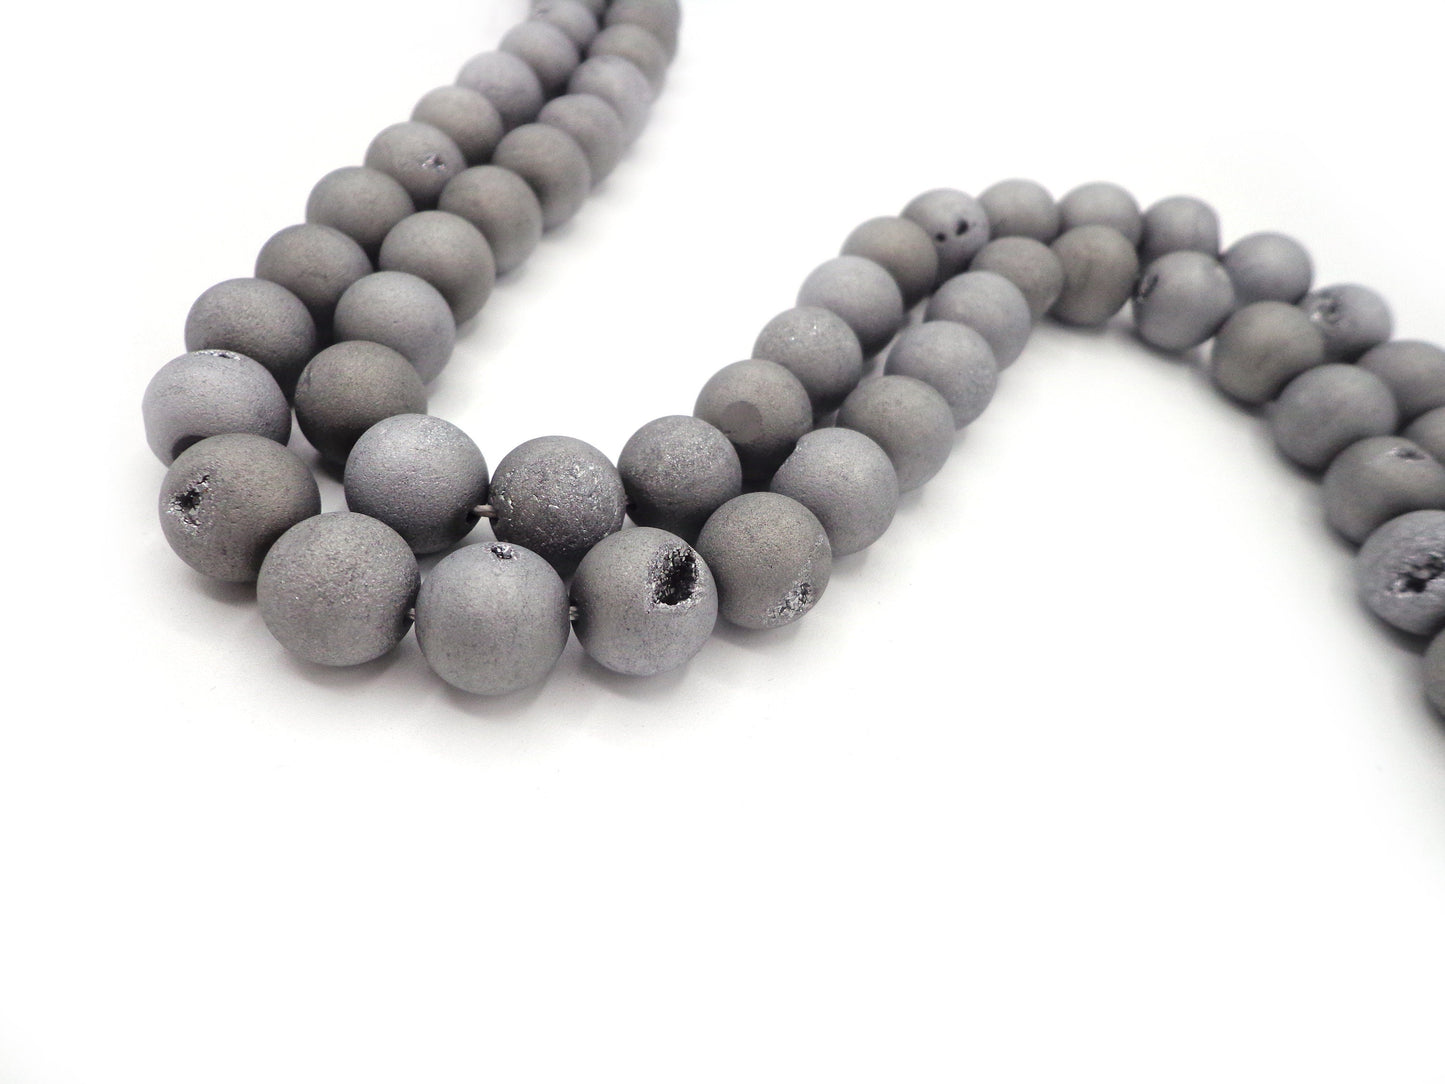 NATURAL Gemstone Druzy Agate Beads, Silver Smooth Round, Matte Finish, 6mm 8mm 10mm 12mm Full Strand 15.5" Great for jewelry making!!!